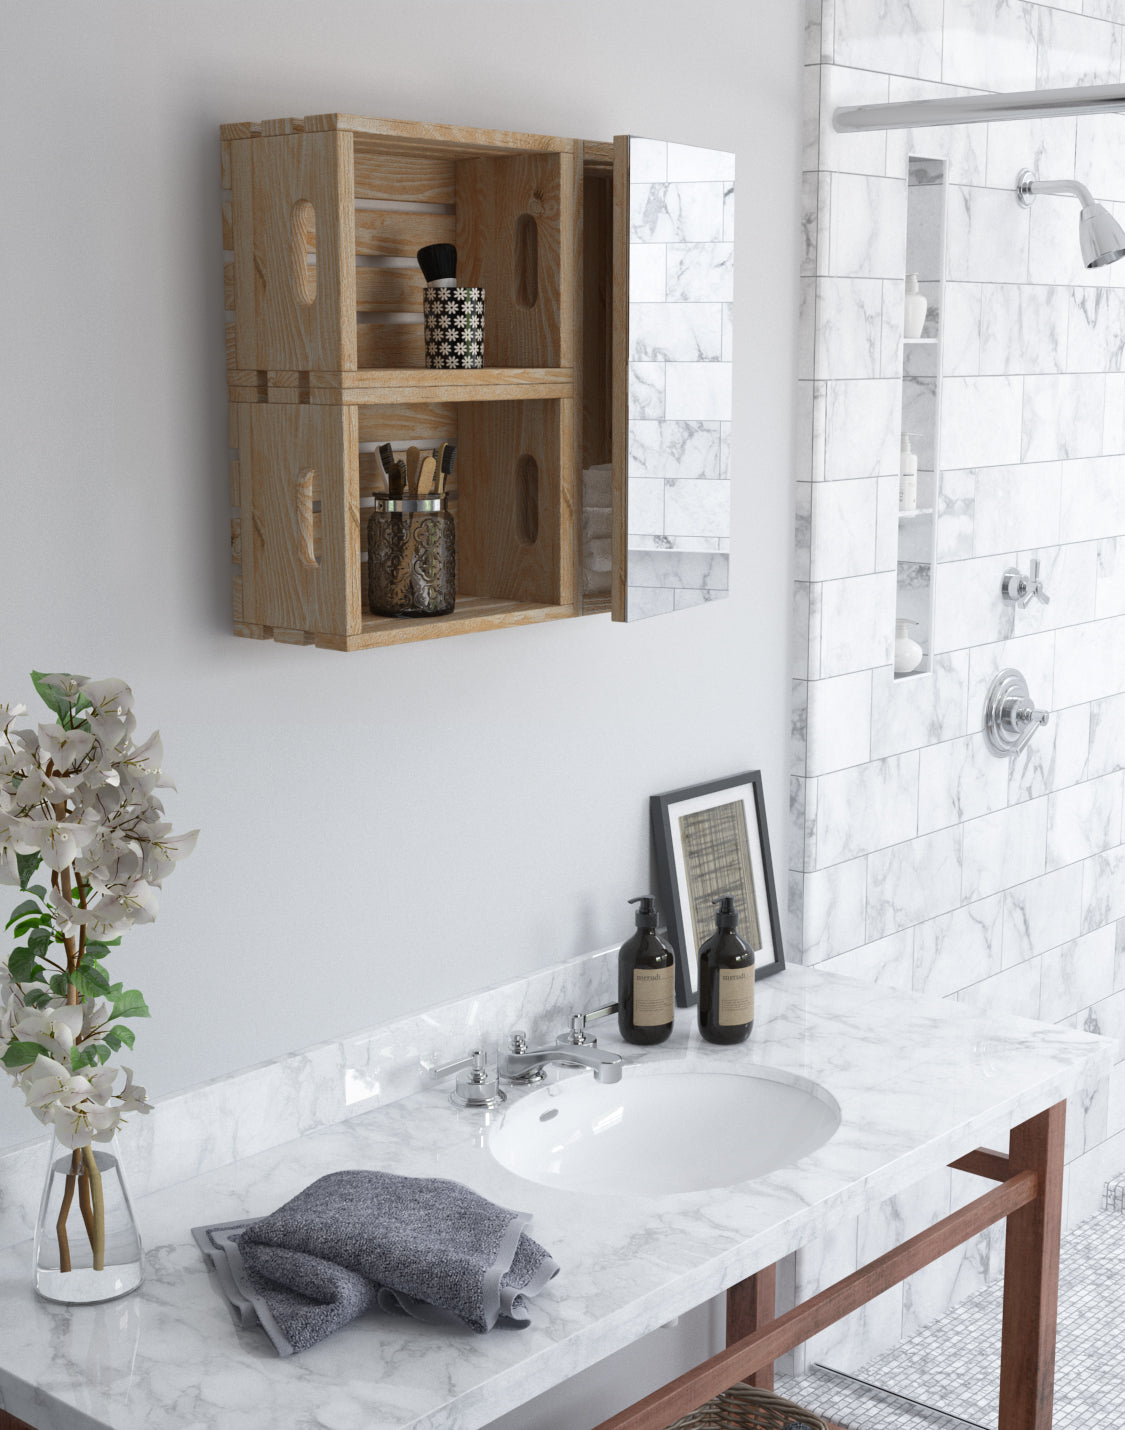 Grosvalds Bathroom Unit Modular And real wood furniture product